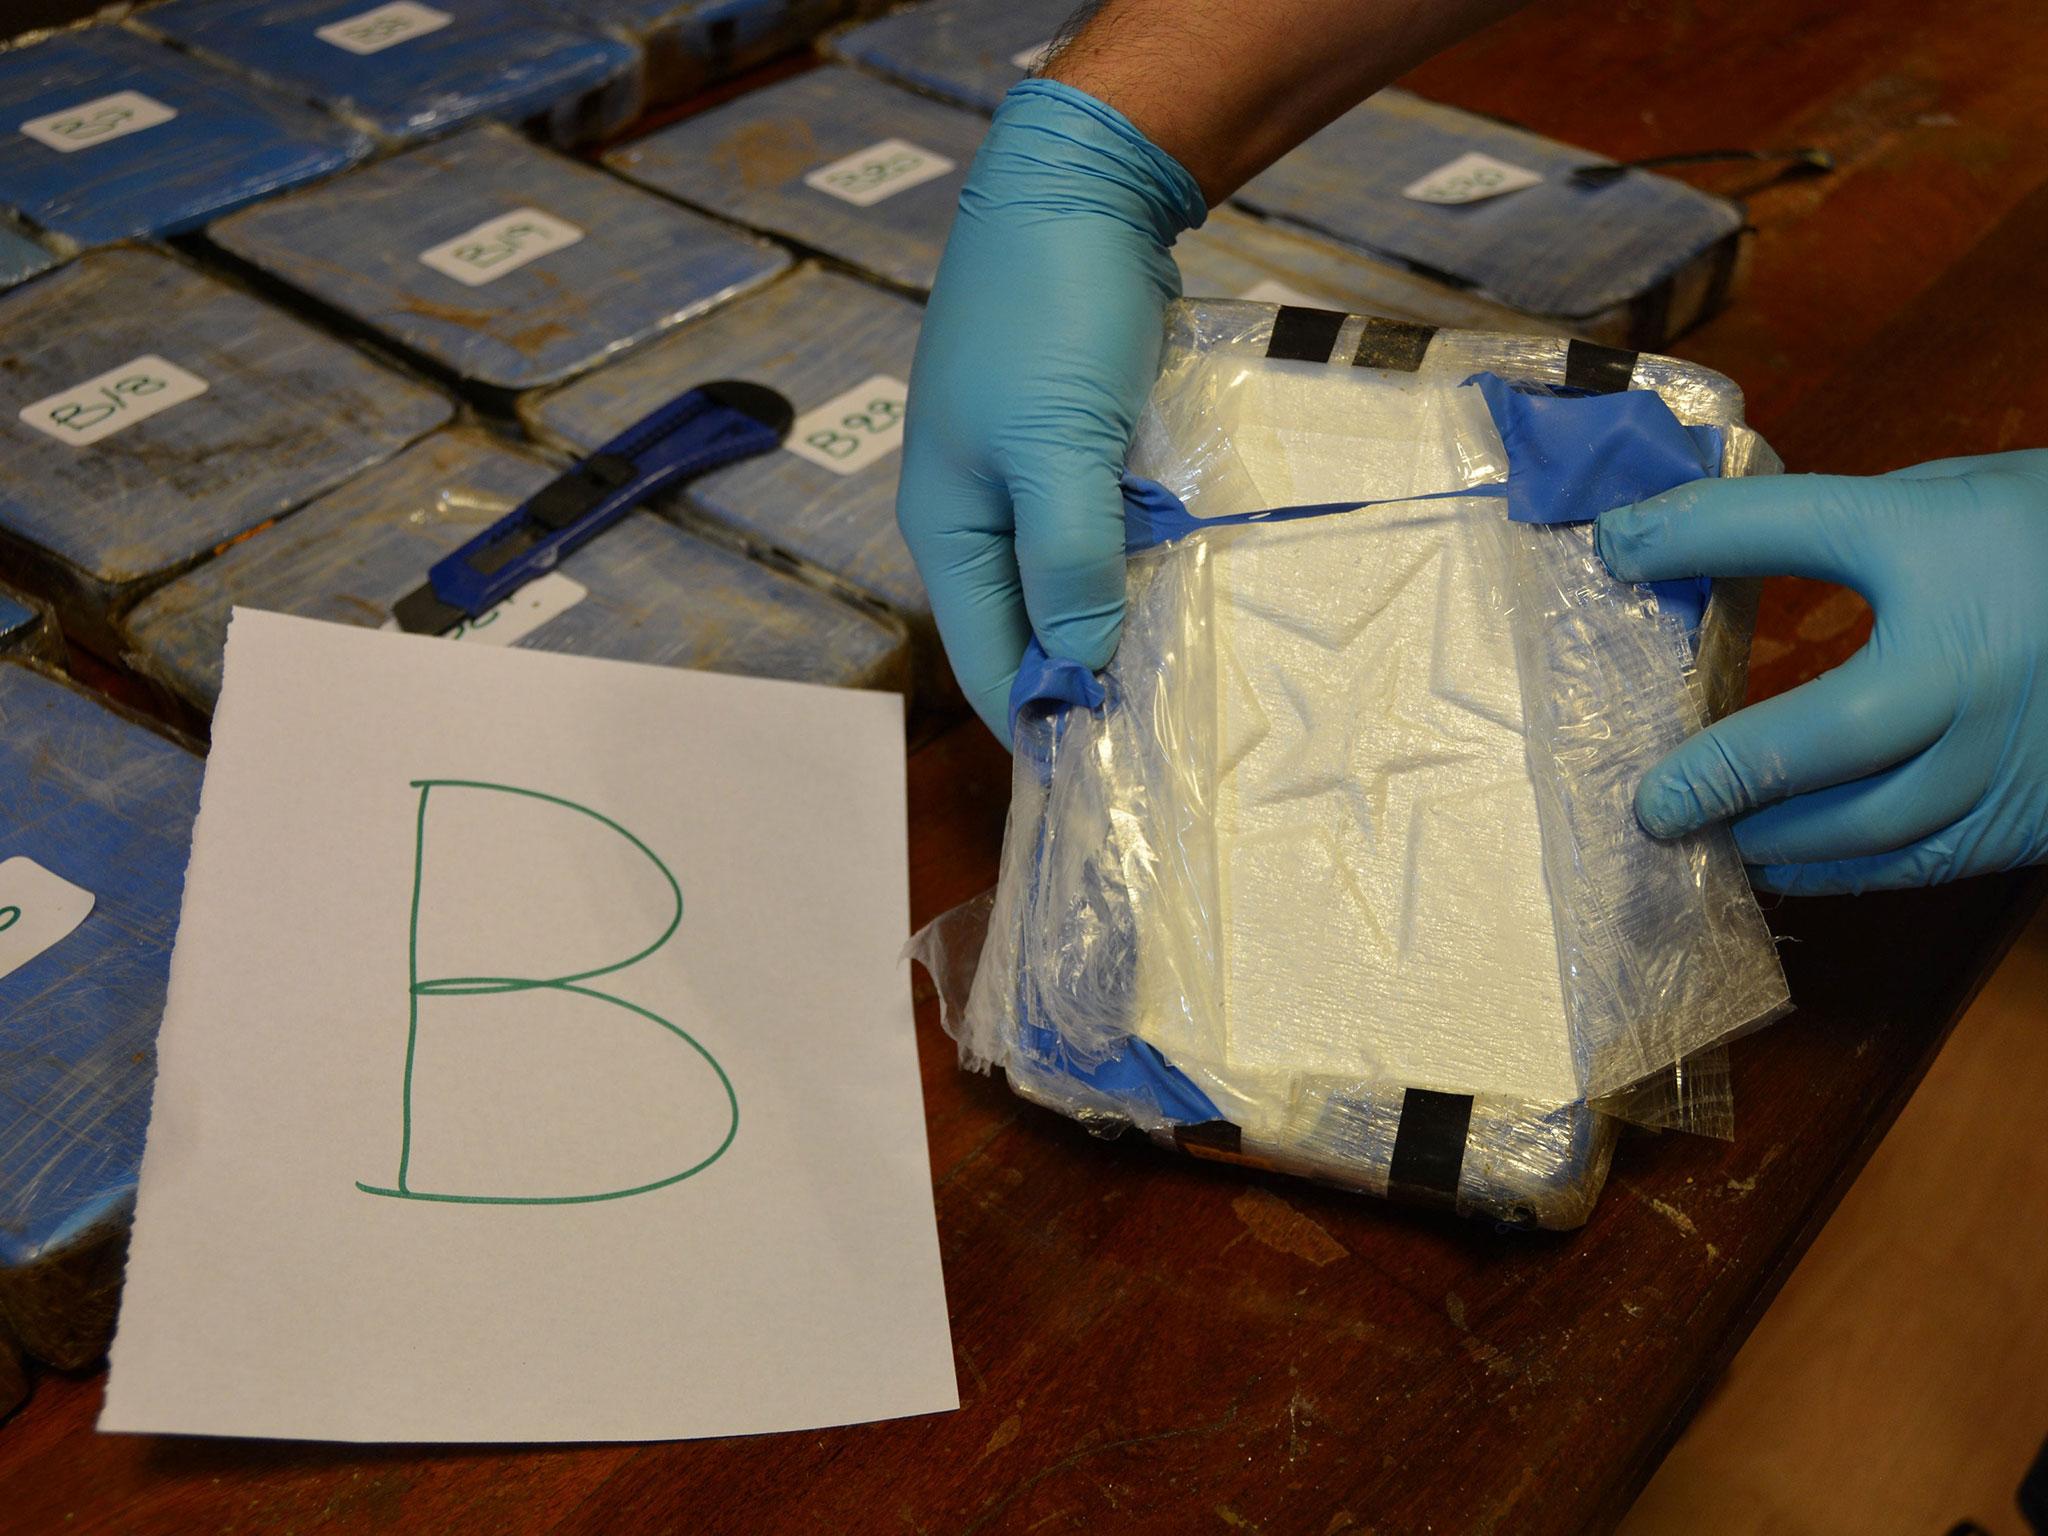 The cocaine that was found in a school attached to the Russian embassy in Buenos Aires